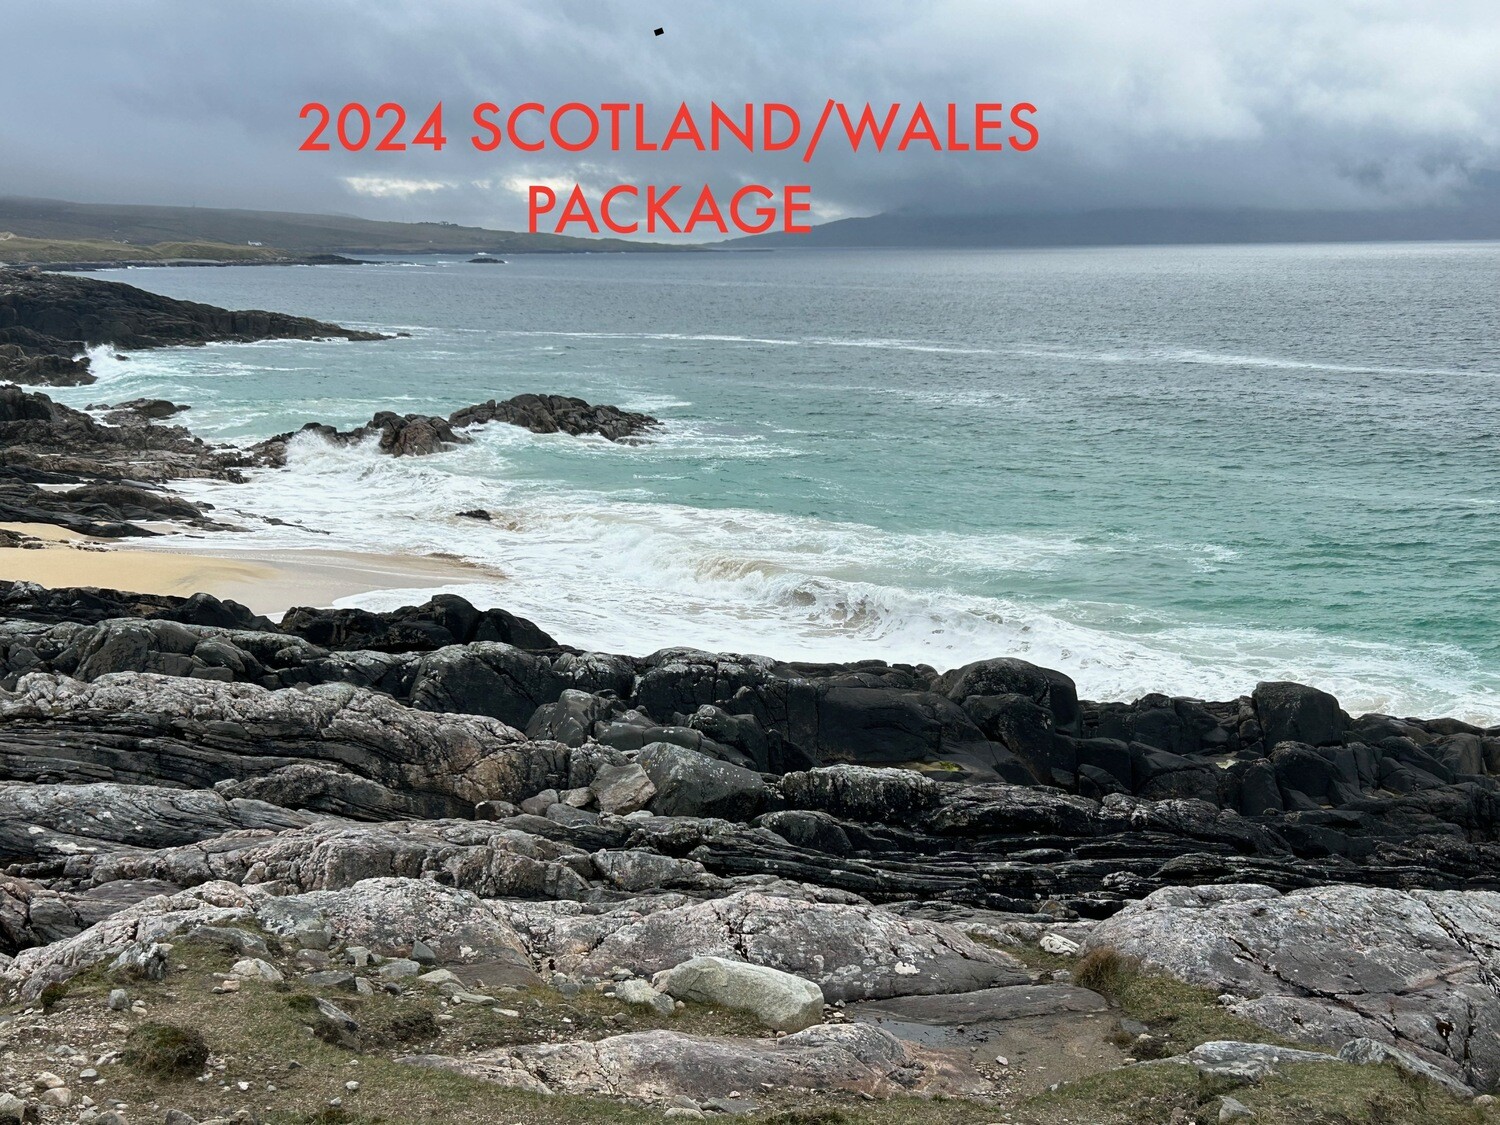 2024 SCOTLAND/WALES PACKAGE BALANCE PAYMENT